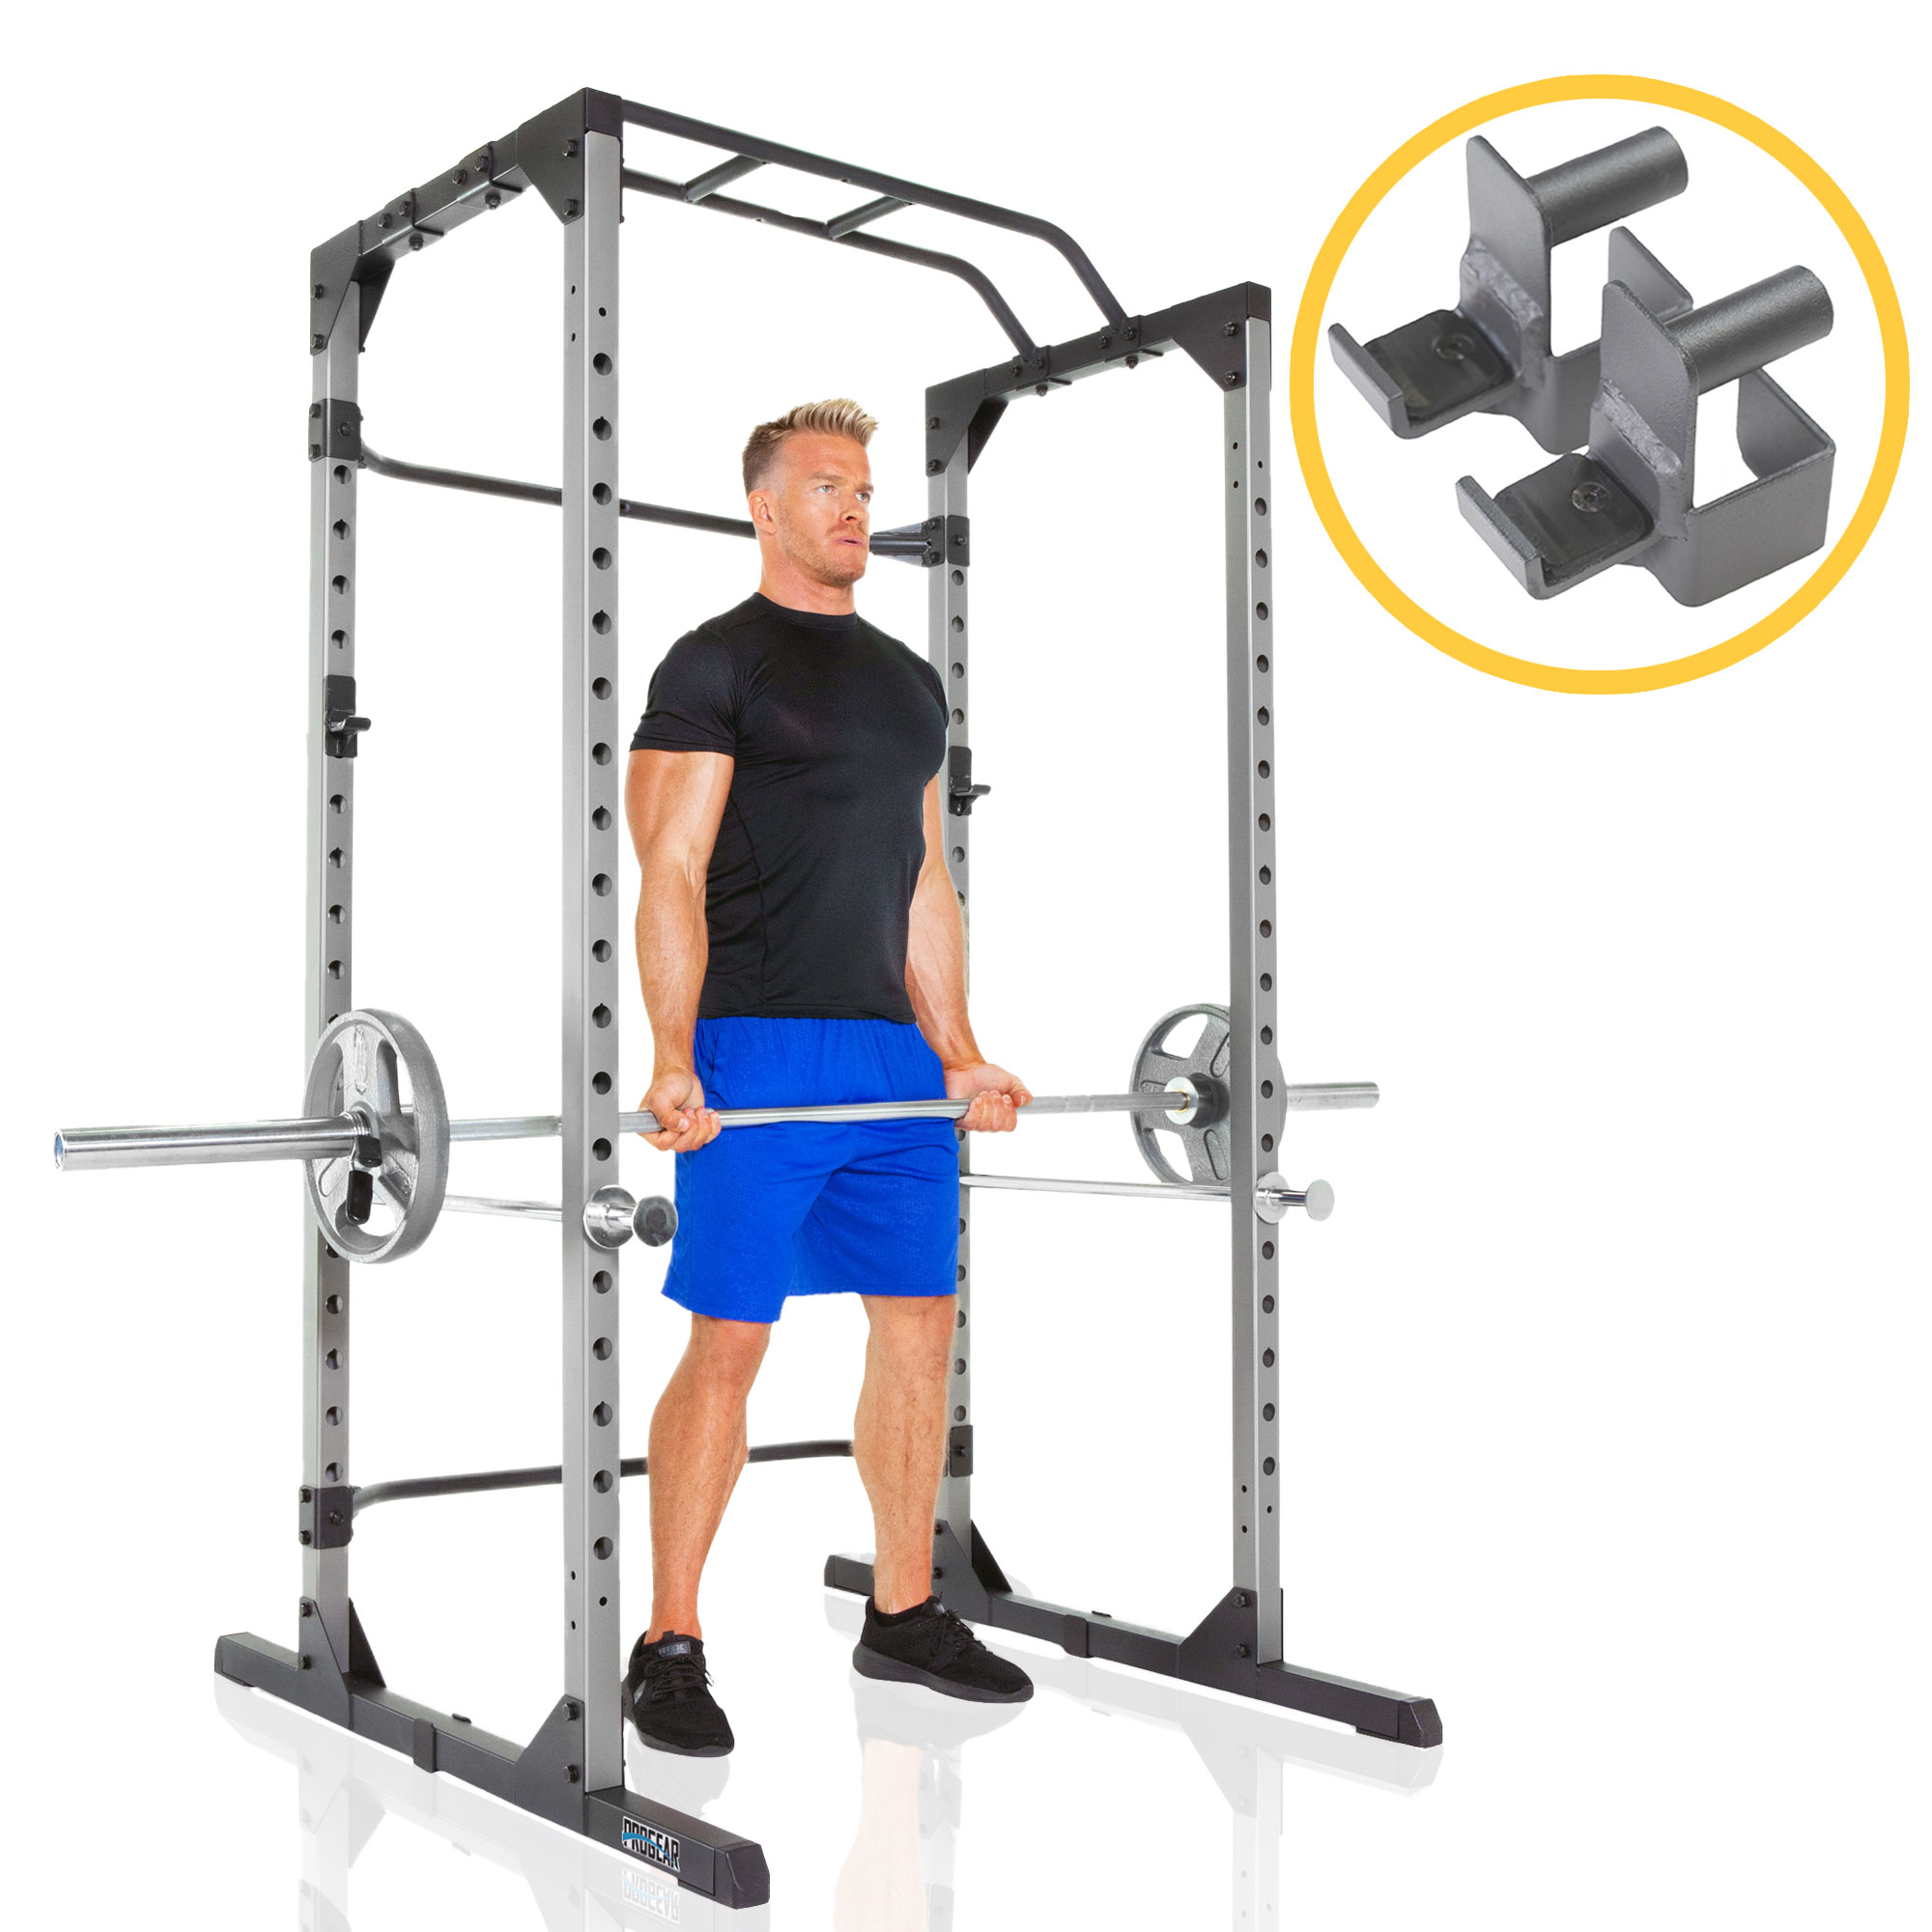 ProGear Squat Rack Power Cage with J-Hooks, Ultra Strength 800lb Weight Capacity, Optional Lat Pulldown Attachment - image 1 of 6